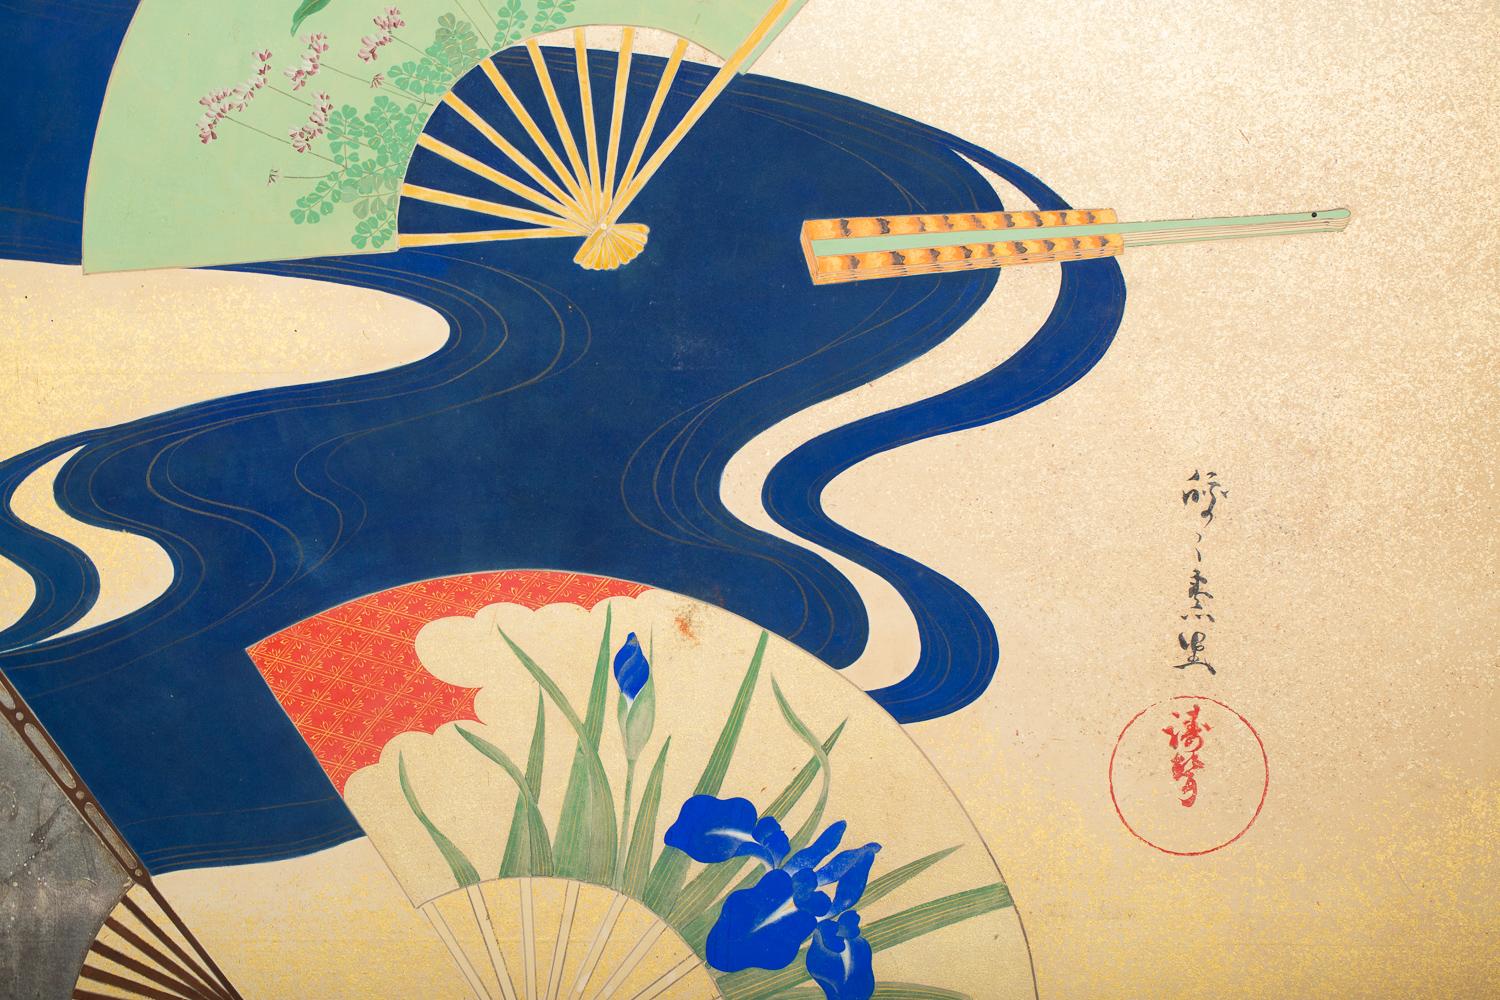 Japanese two-panel screen, deco landscape with river fans. Modern scene of a 12th century festival in Kyoto in which fans are sent down the Kamo River and caught downstream. Taisho (1912-1926) period painting in Rimpa School style. Signature reads: